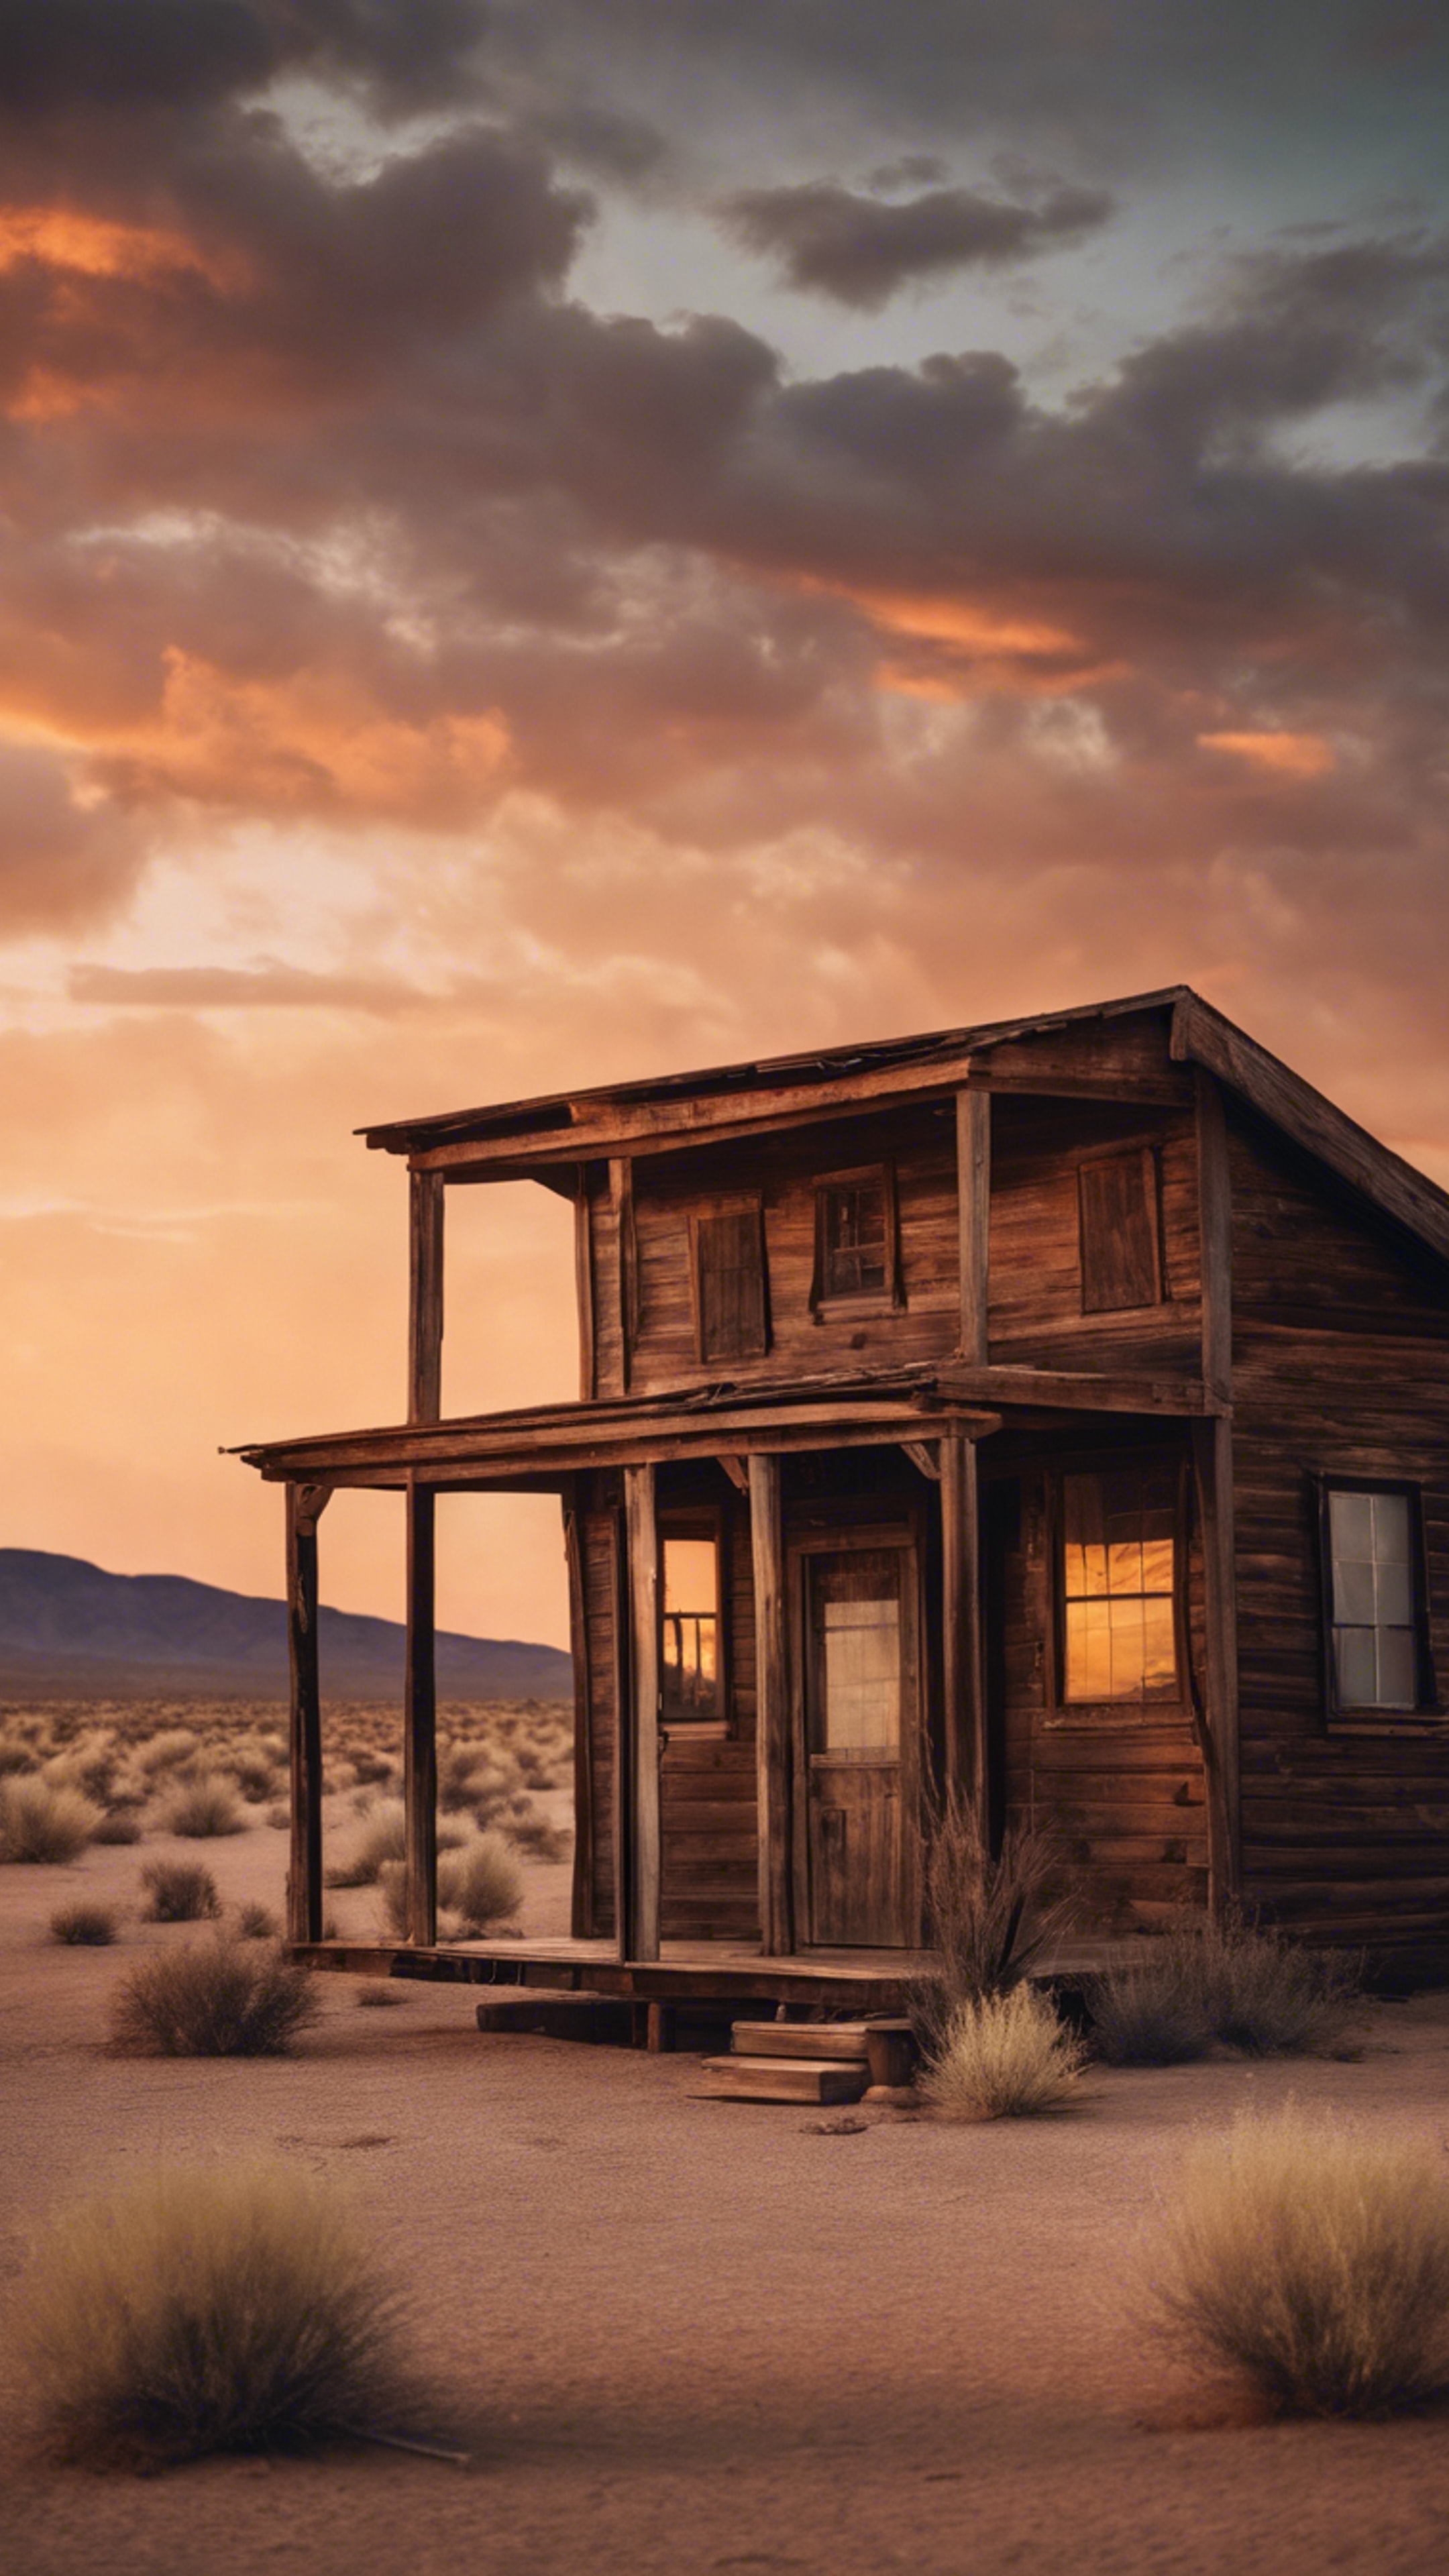 A dust-swept desert scene with a lone cabin standing resiliently during a blazing sunset in the wild west. Papel de parede[55ae6b4a2ff440e59218]